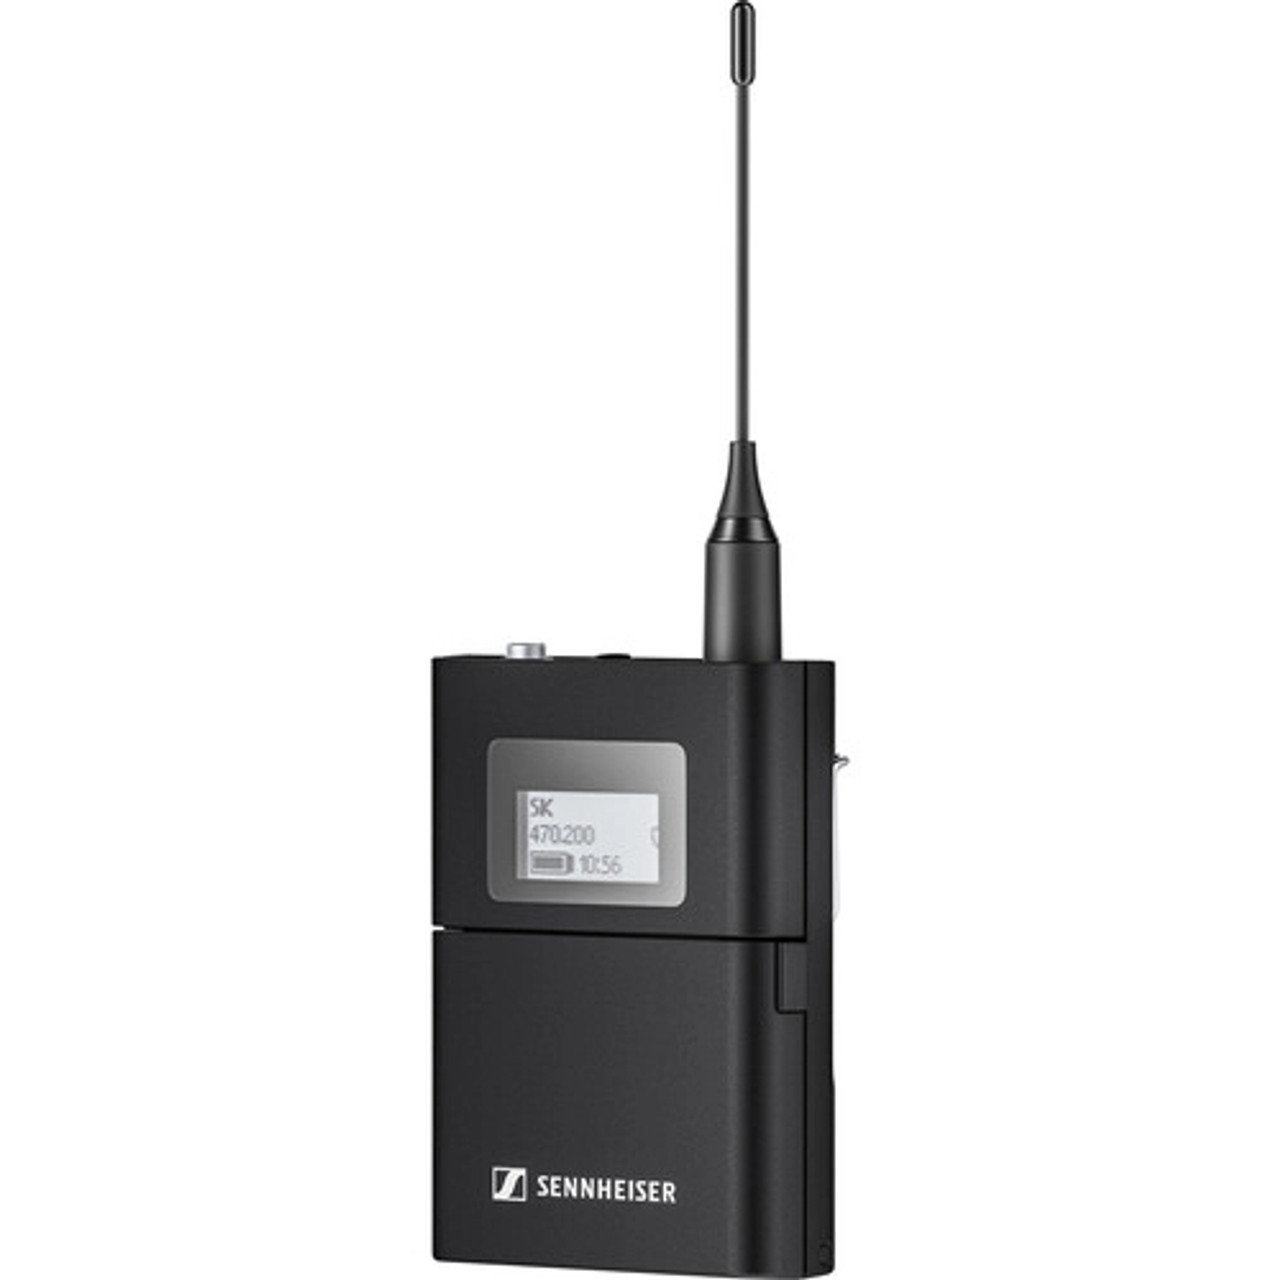 Sennheiser EW-DX TS 5-PIN Digital Wireless Tablestand Transmitter with  5-Pin XLR Connector, No Mic (R1-9: 520 to 607 MHz)